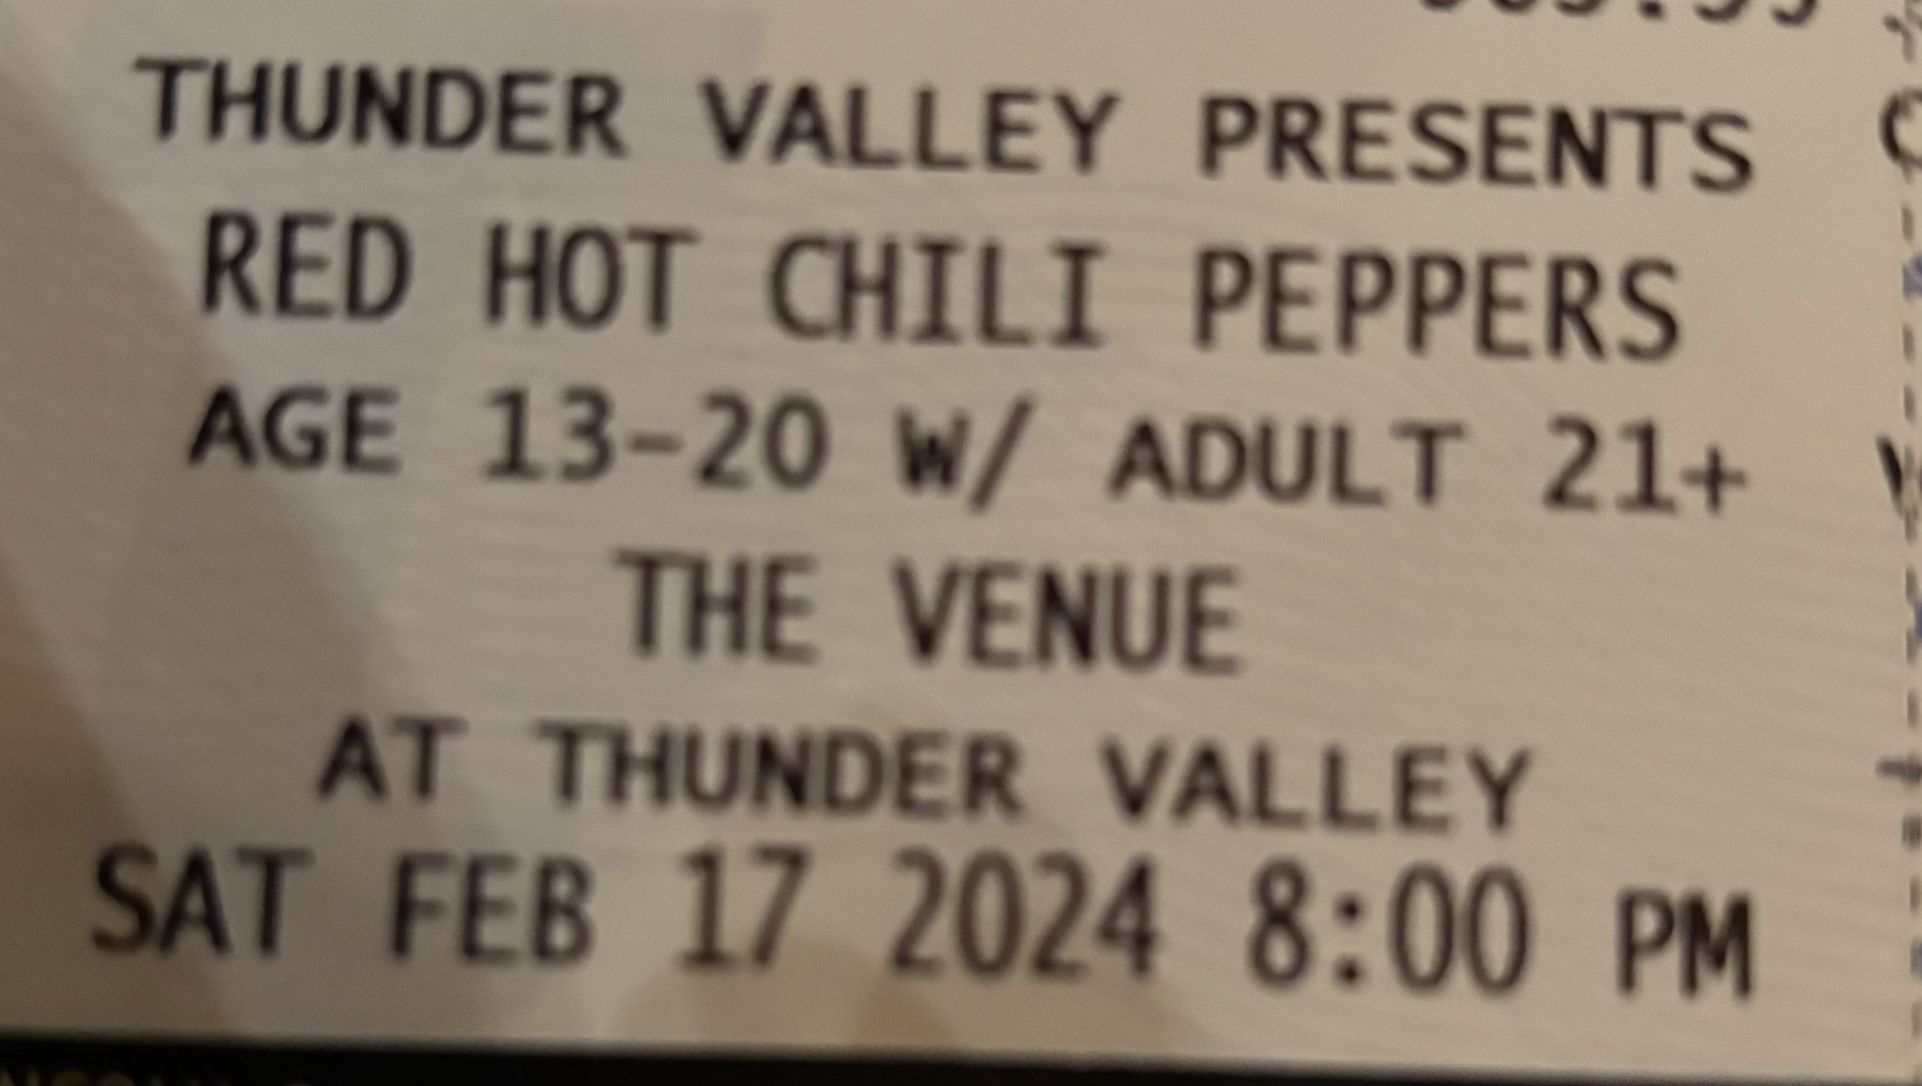 Red Hot Chili Peppers Feb 17